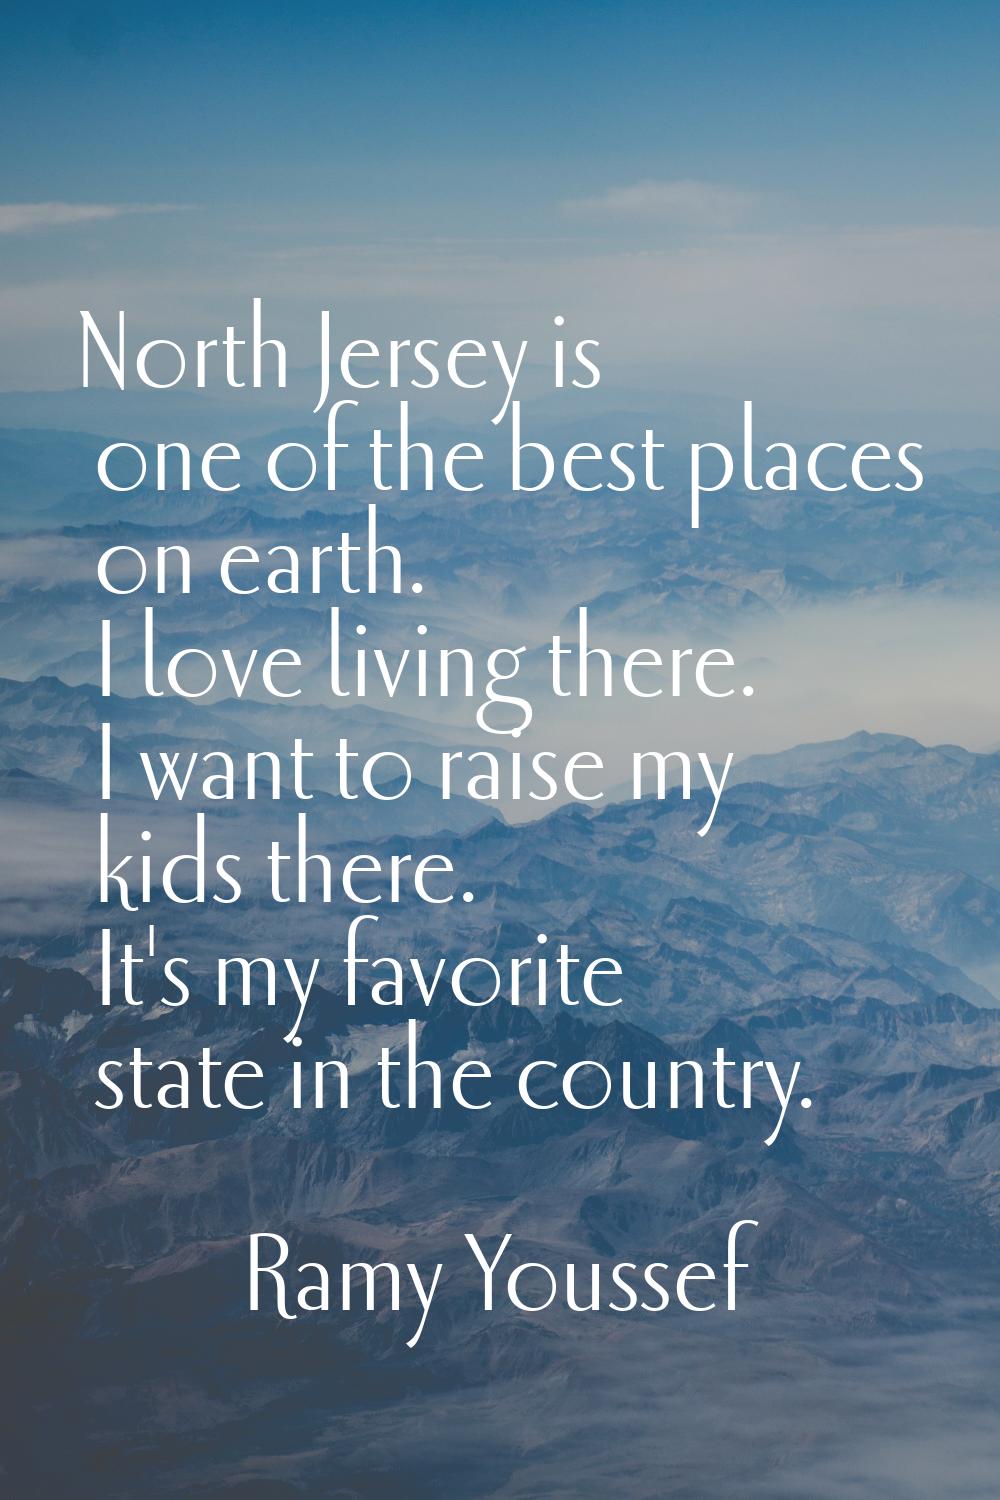 North Jersey is one of the best places on earth. I love living there. I want to raise my kids there